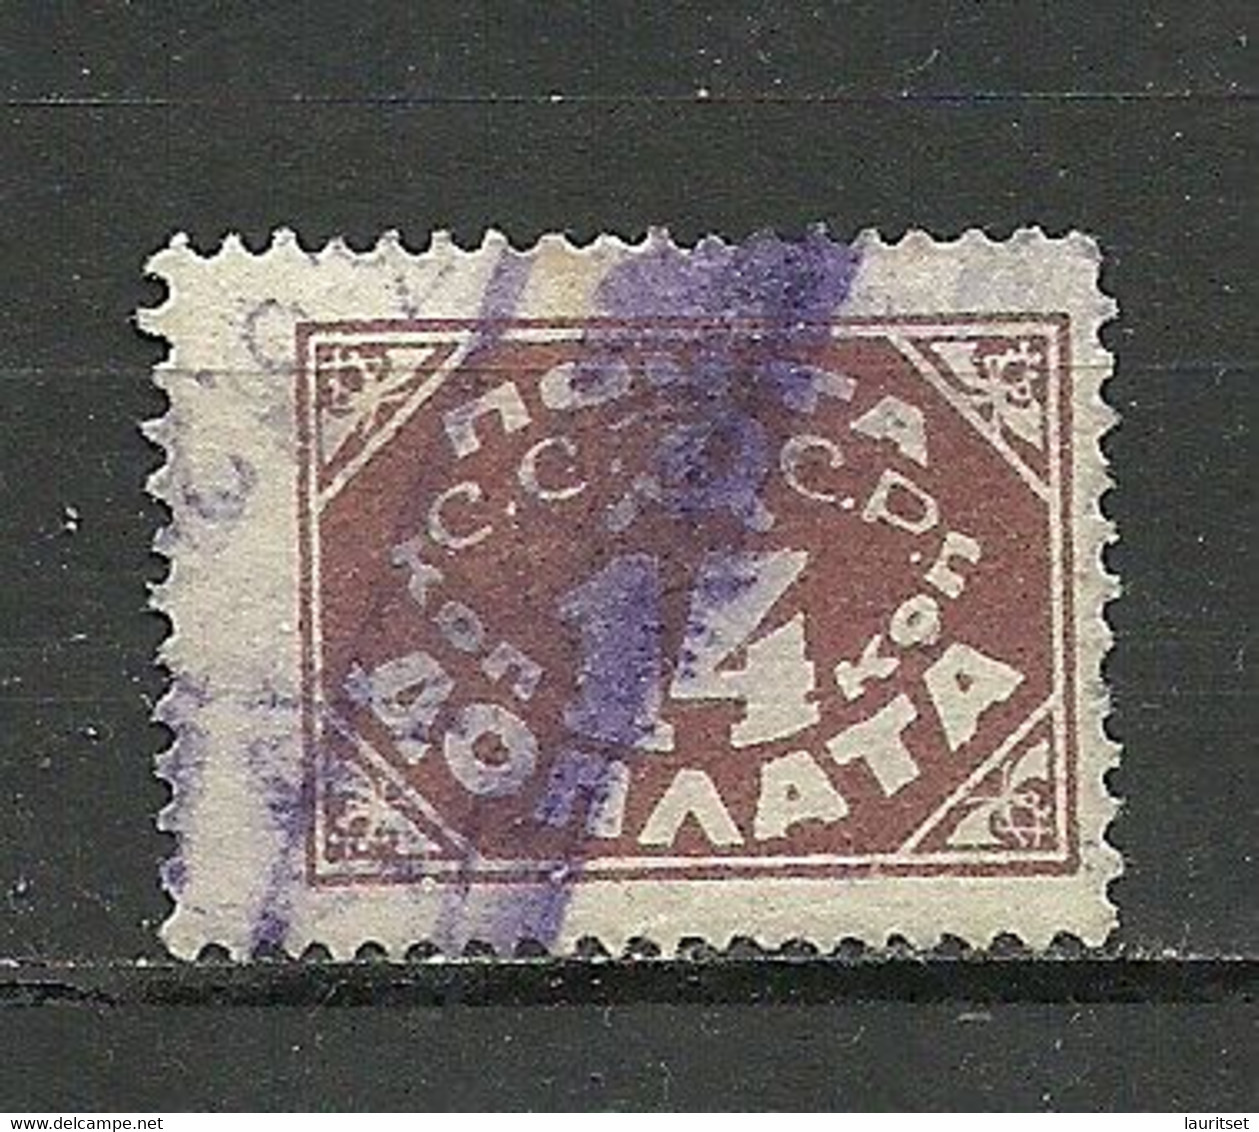 RUSSLAND RUSSIA 1925 Porto Postage Due Michel 17 I B (perf 14 1/2:14 Without WM) O - Tasse